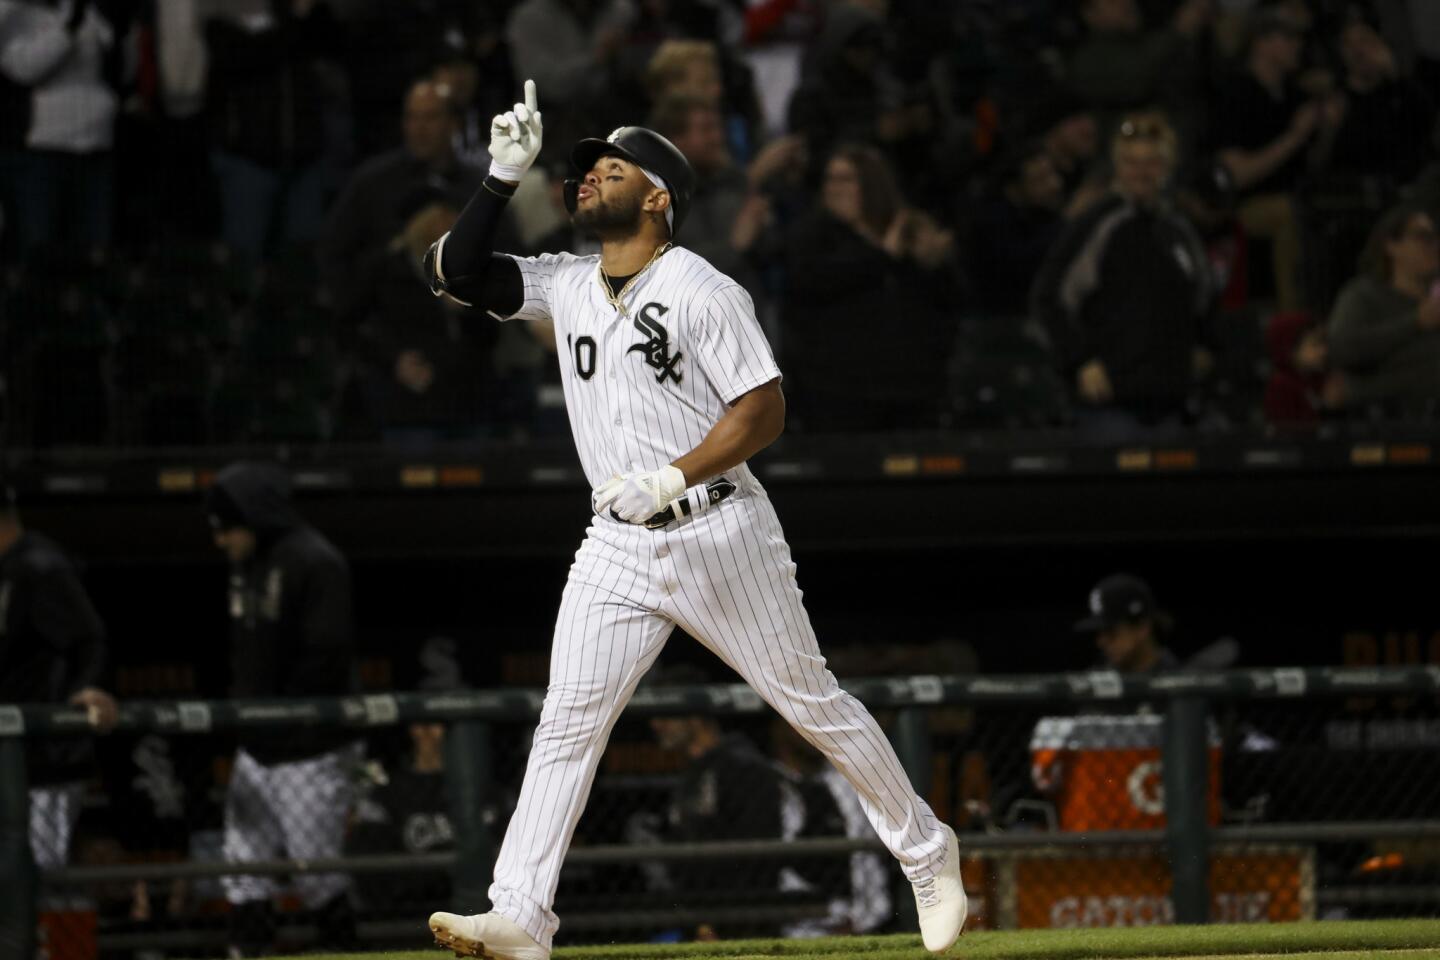 White Sox third baseman Yoan Moncada points up before crossing home plate after hitting a solo homer during the third inning against the Royals on April 16, 2019, at Guaranteed Rate Field.